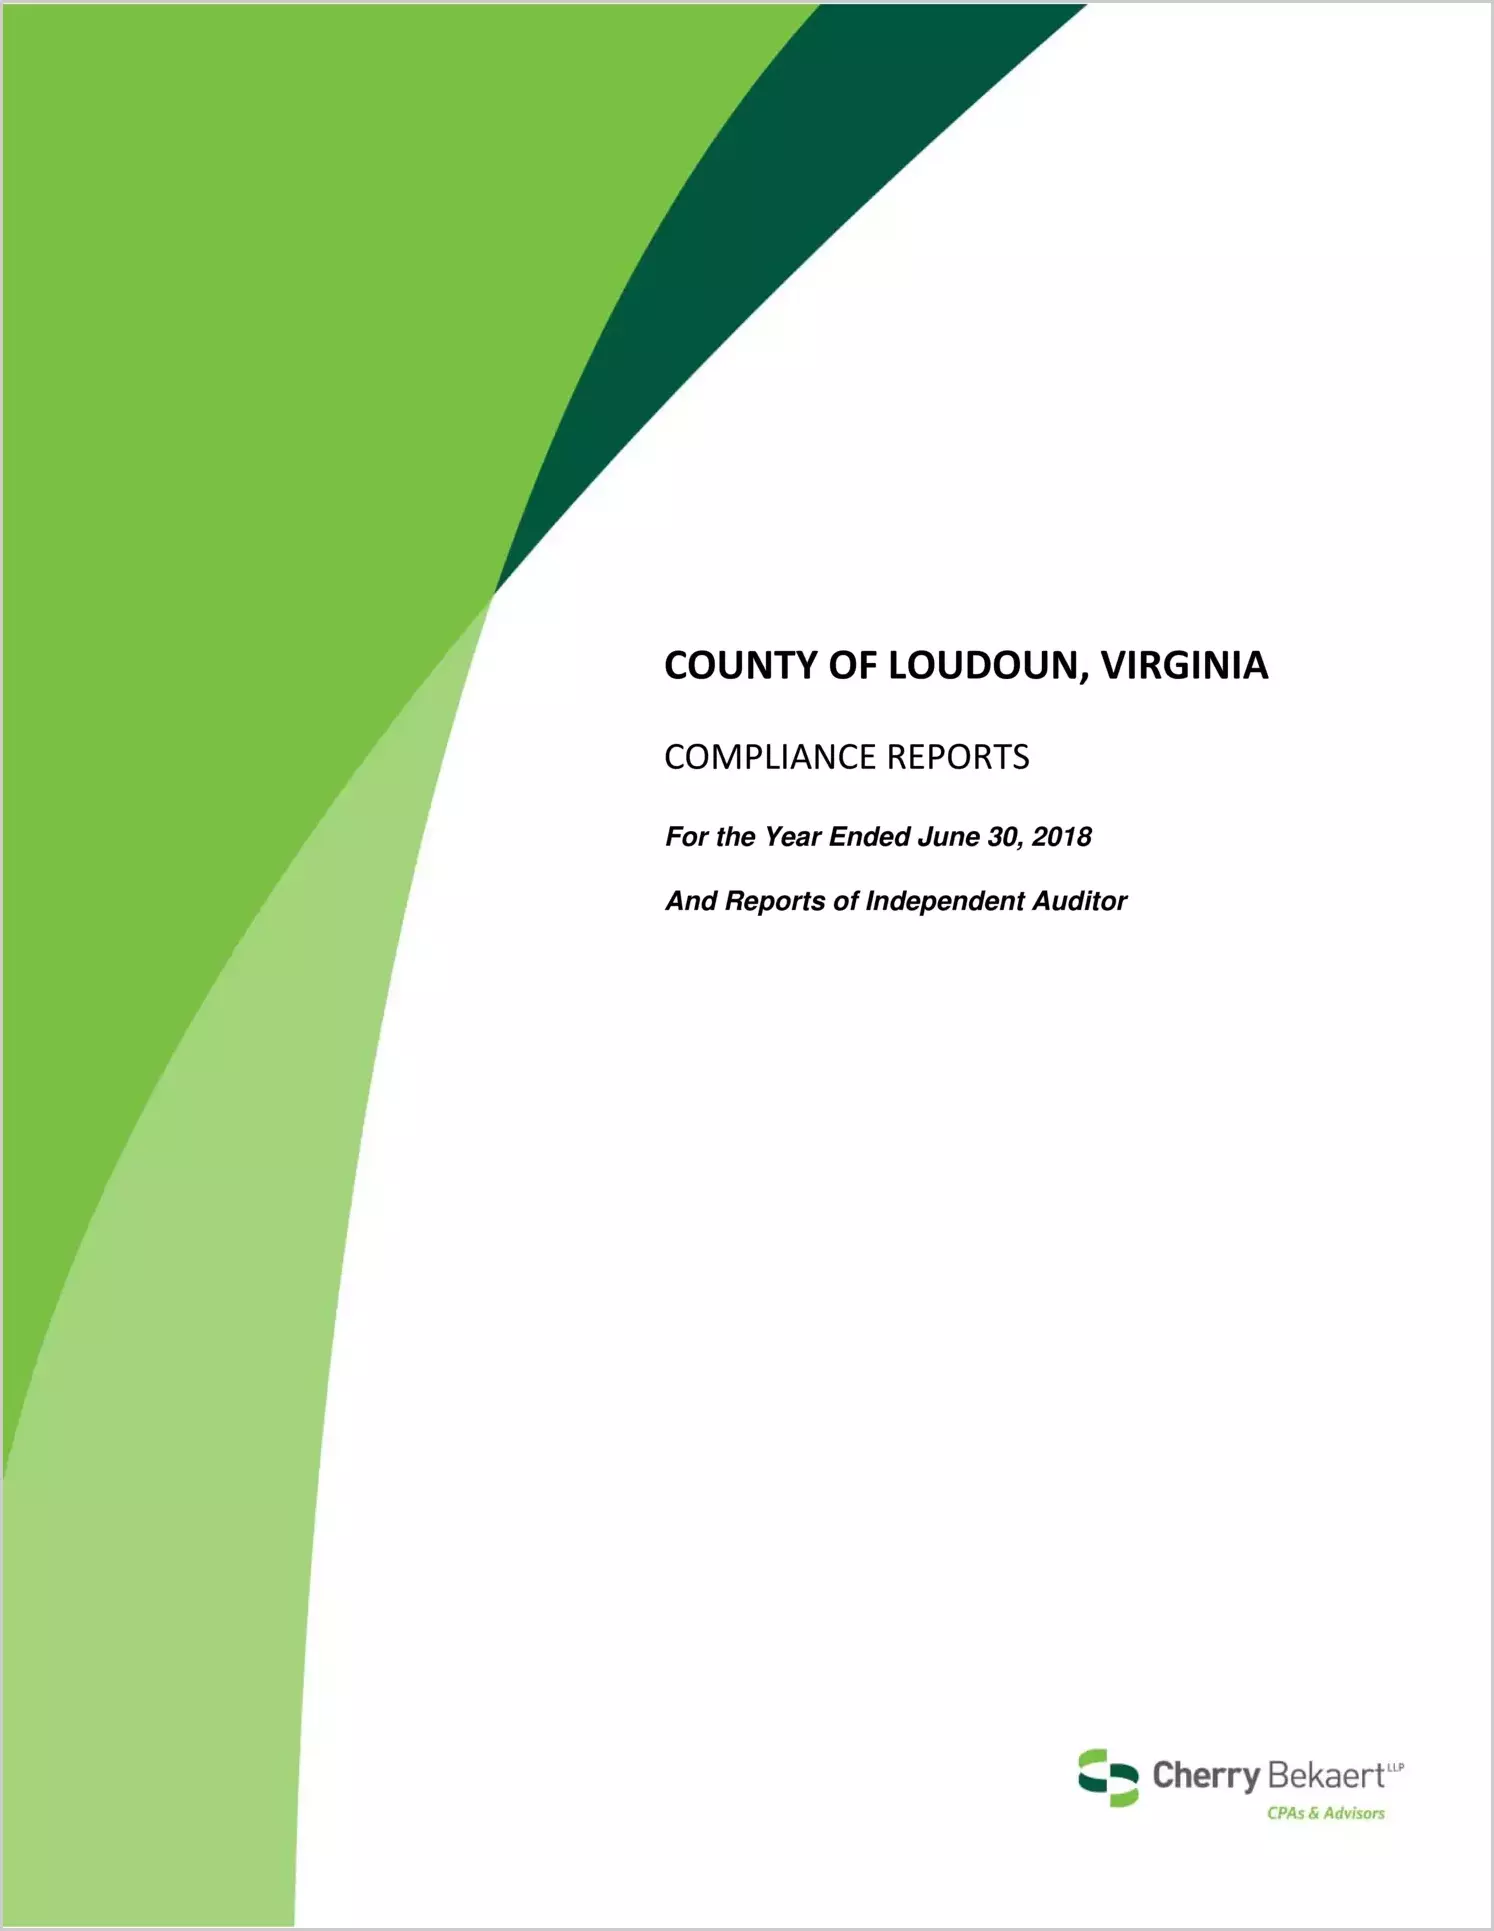 2018 Internal Control and Compliance Report for County of Loudoun